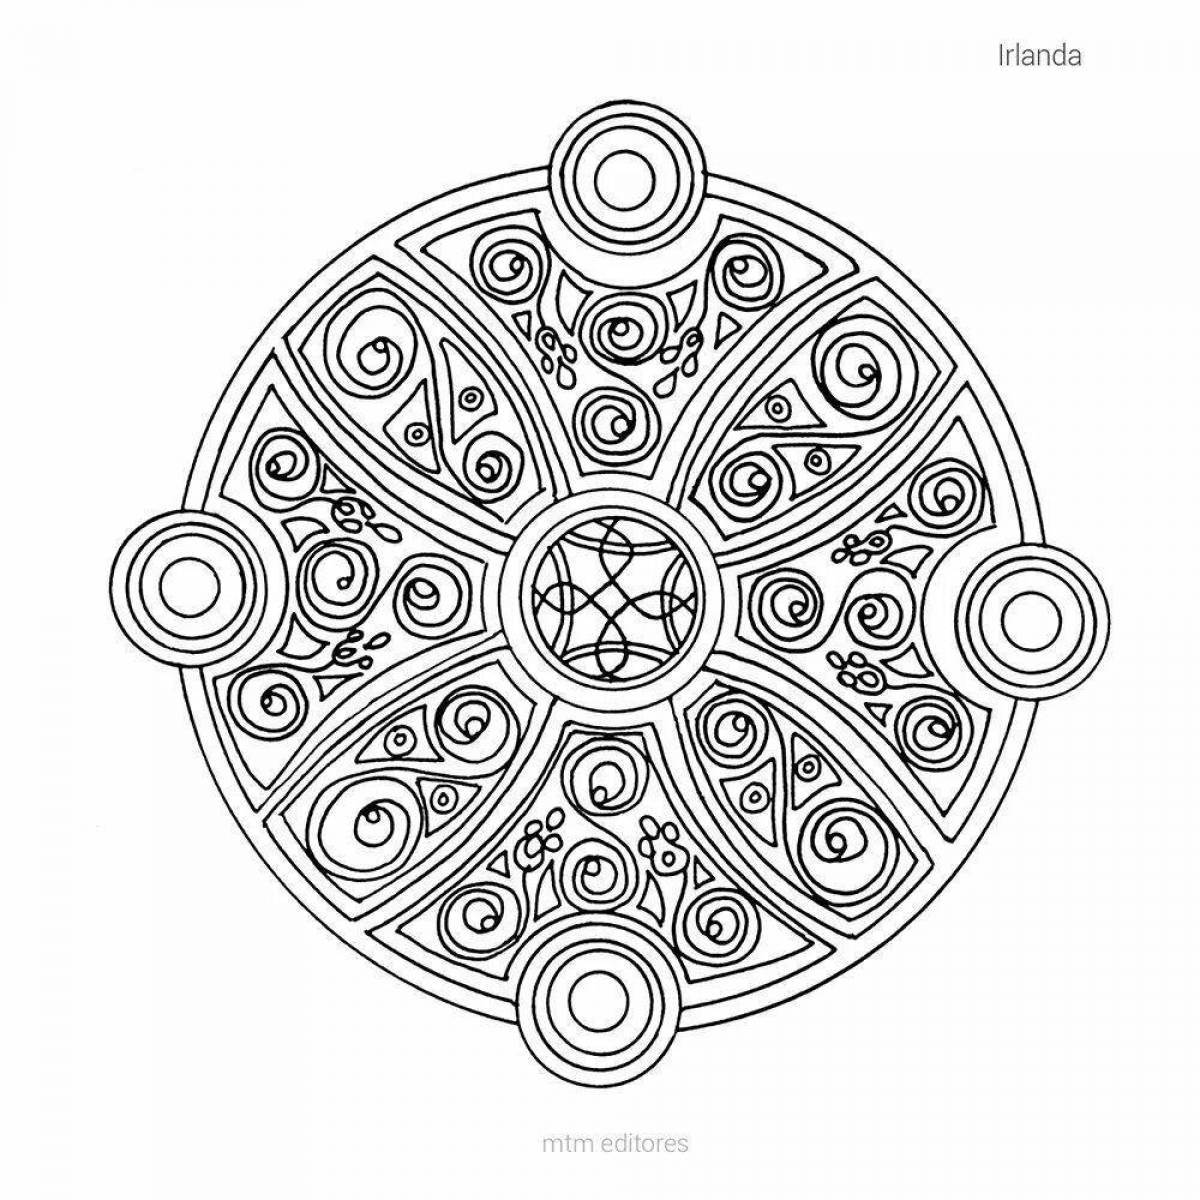 Awesome arabesque coloring book